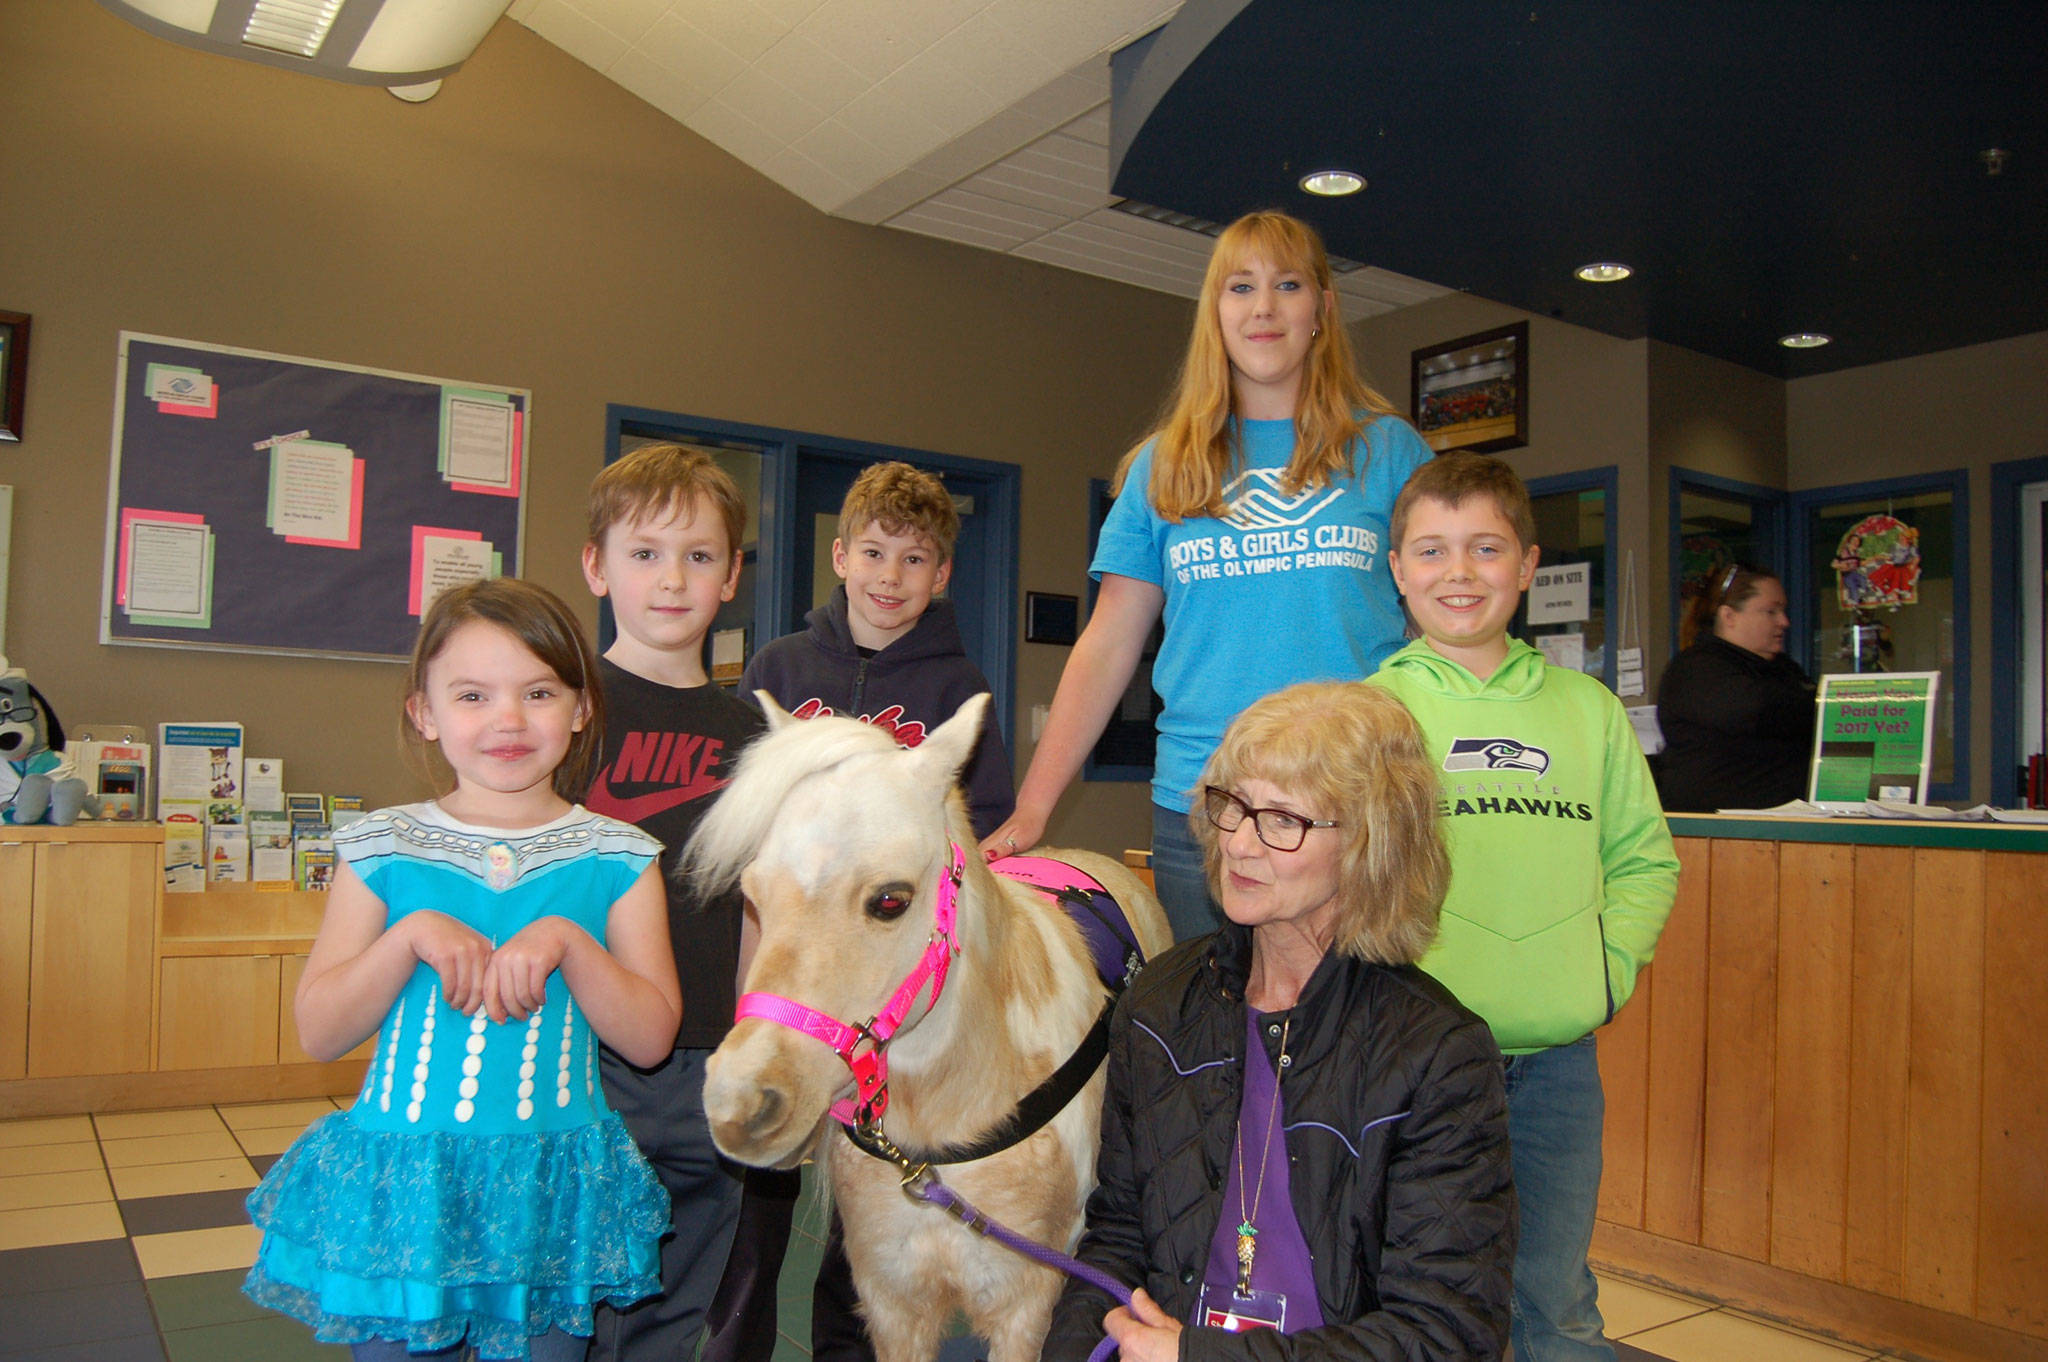 Minaiture therapy horse visits youth